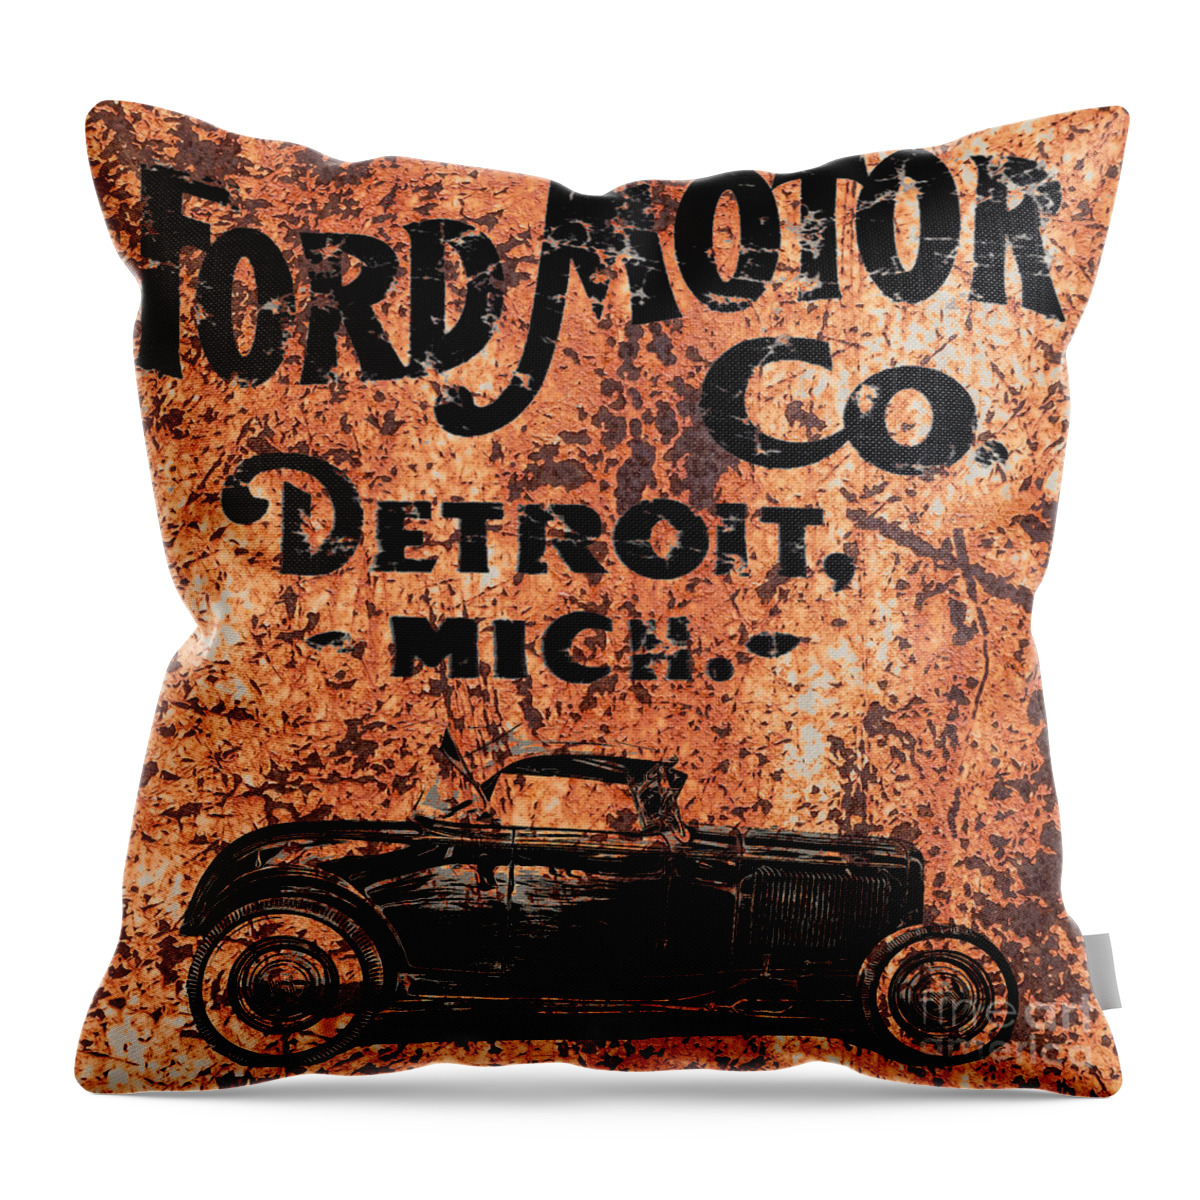 Ford Throw Pillow featuring the digital art Vintage Ford Motor Company by Edward Fielding